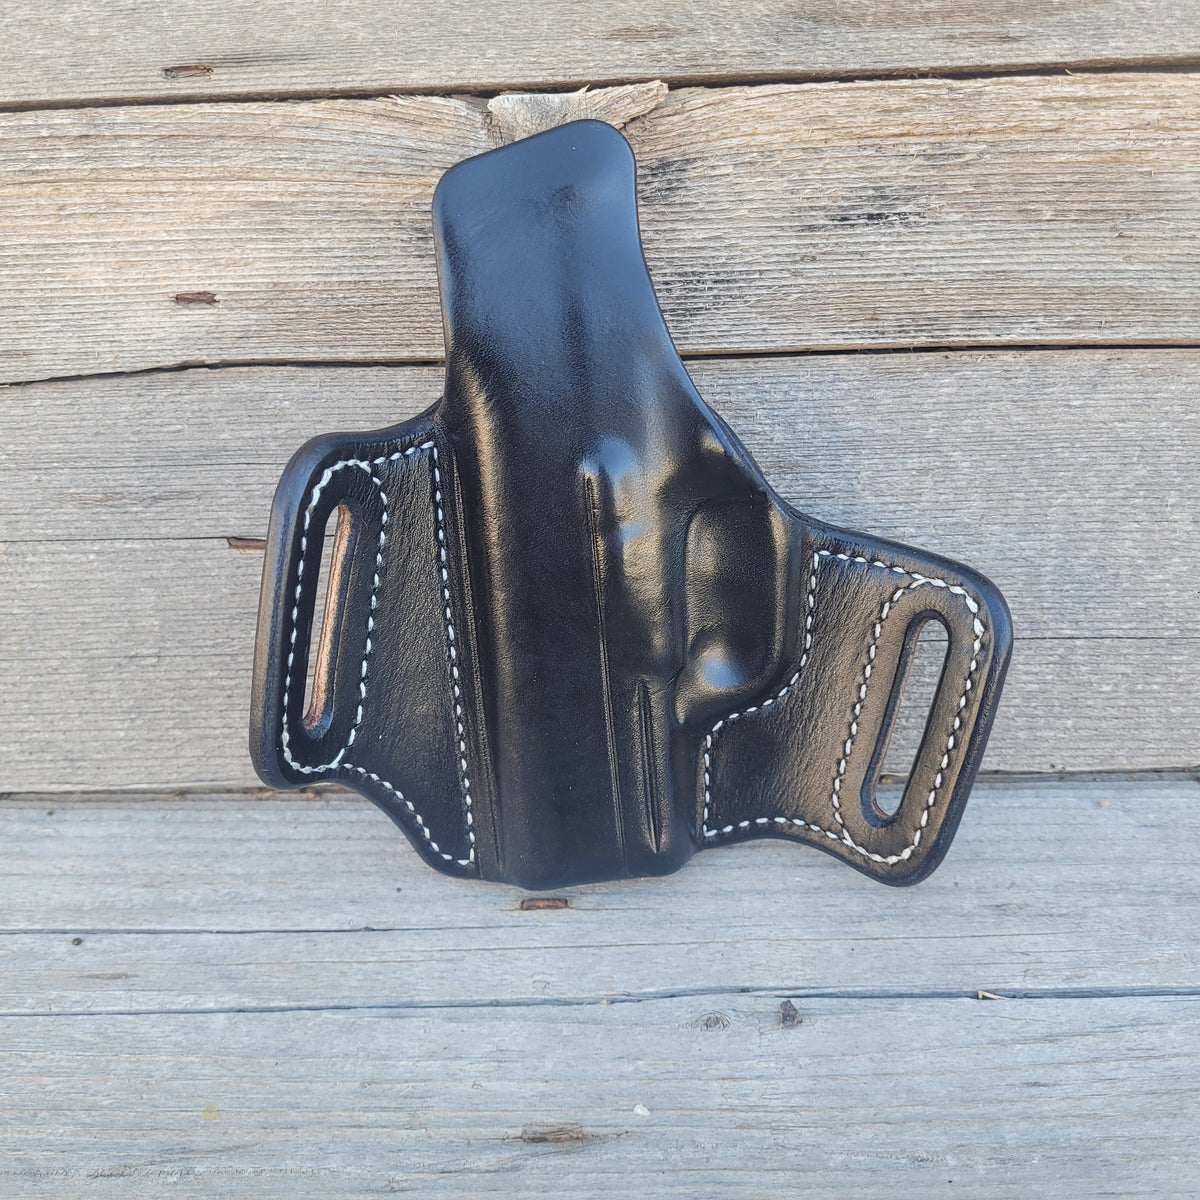 Sig P365 Classic Holster Blk/Brn, White Stitching, With Partial Axe Head Stamp